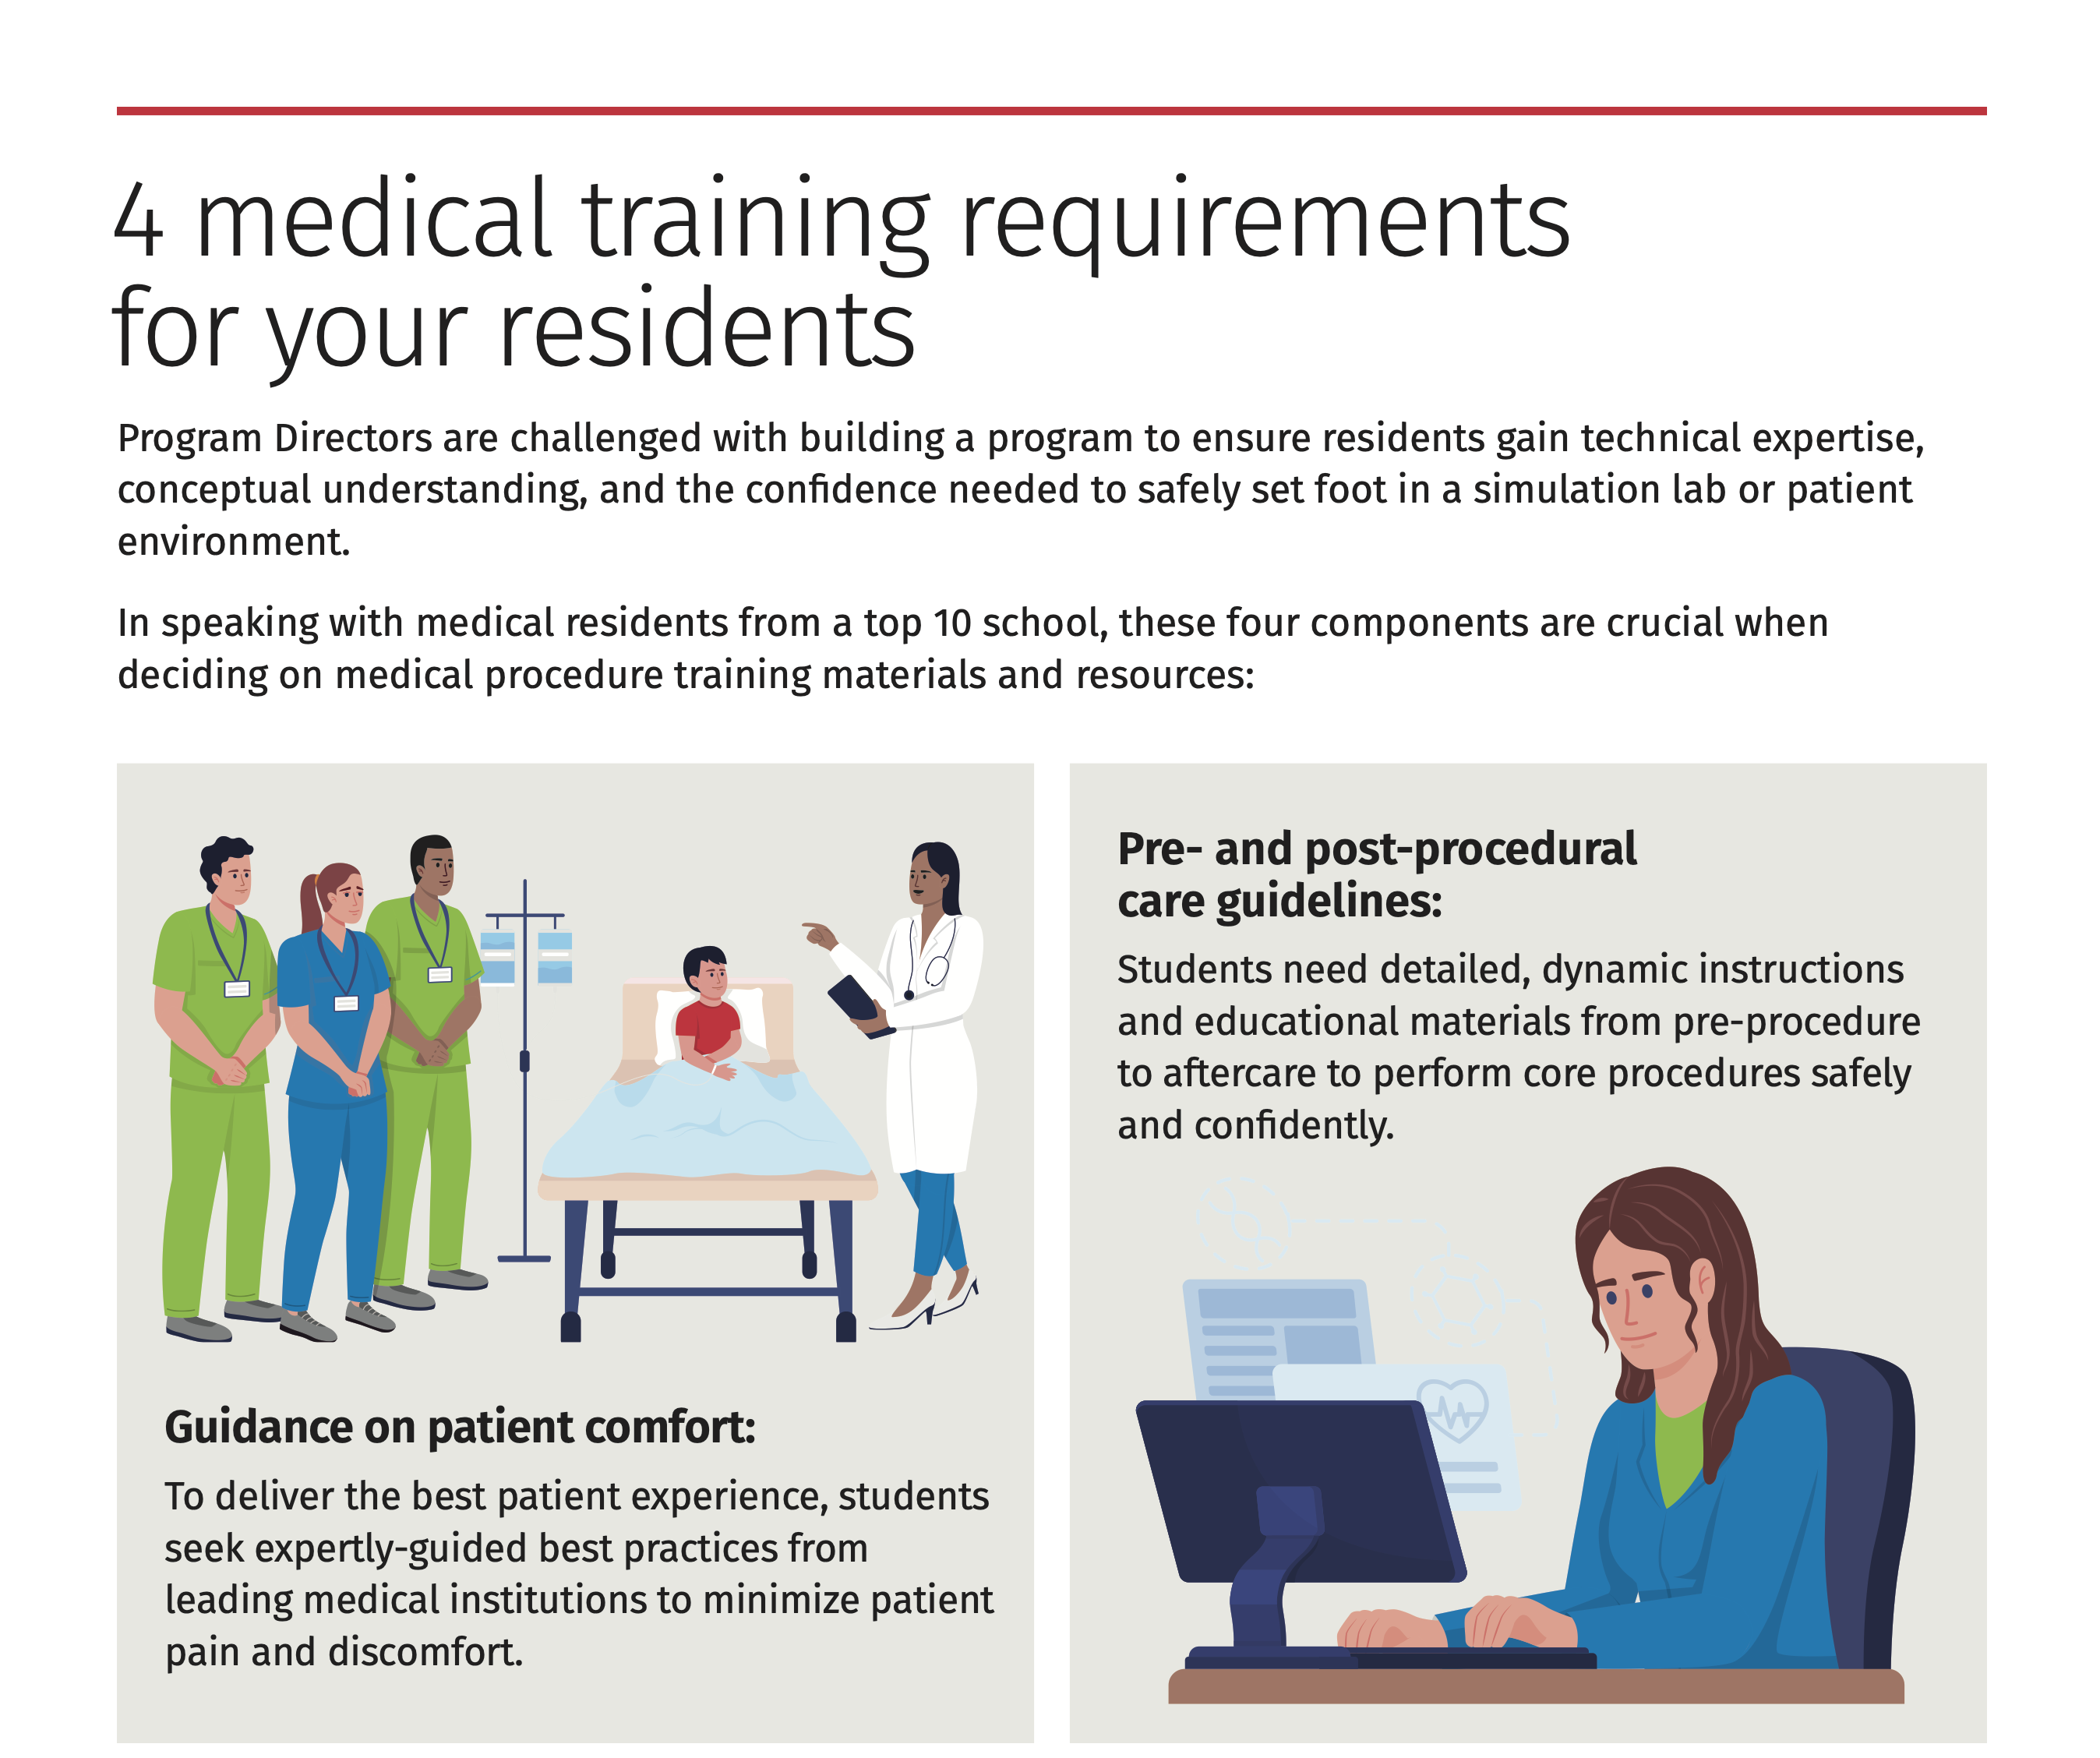 Preview image for "4 Medical training requirements for residents"